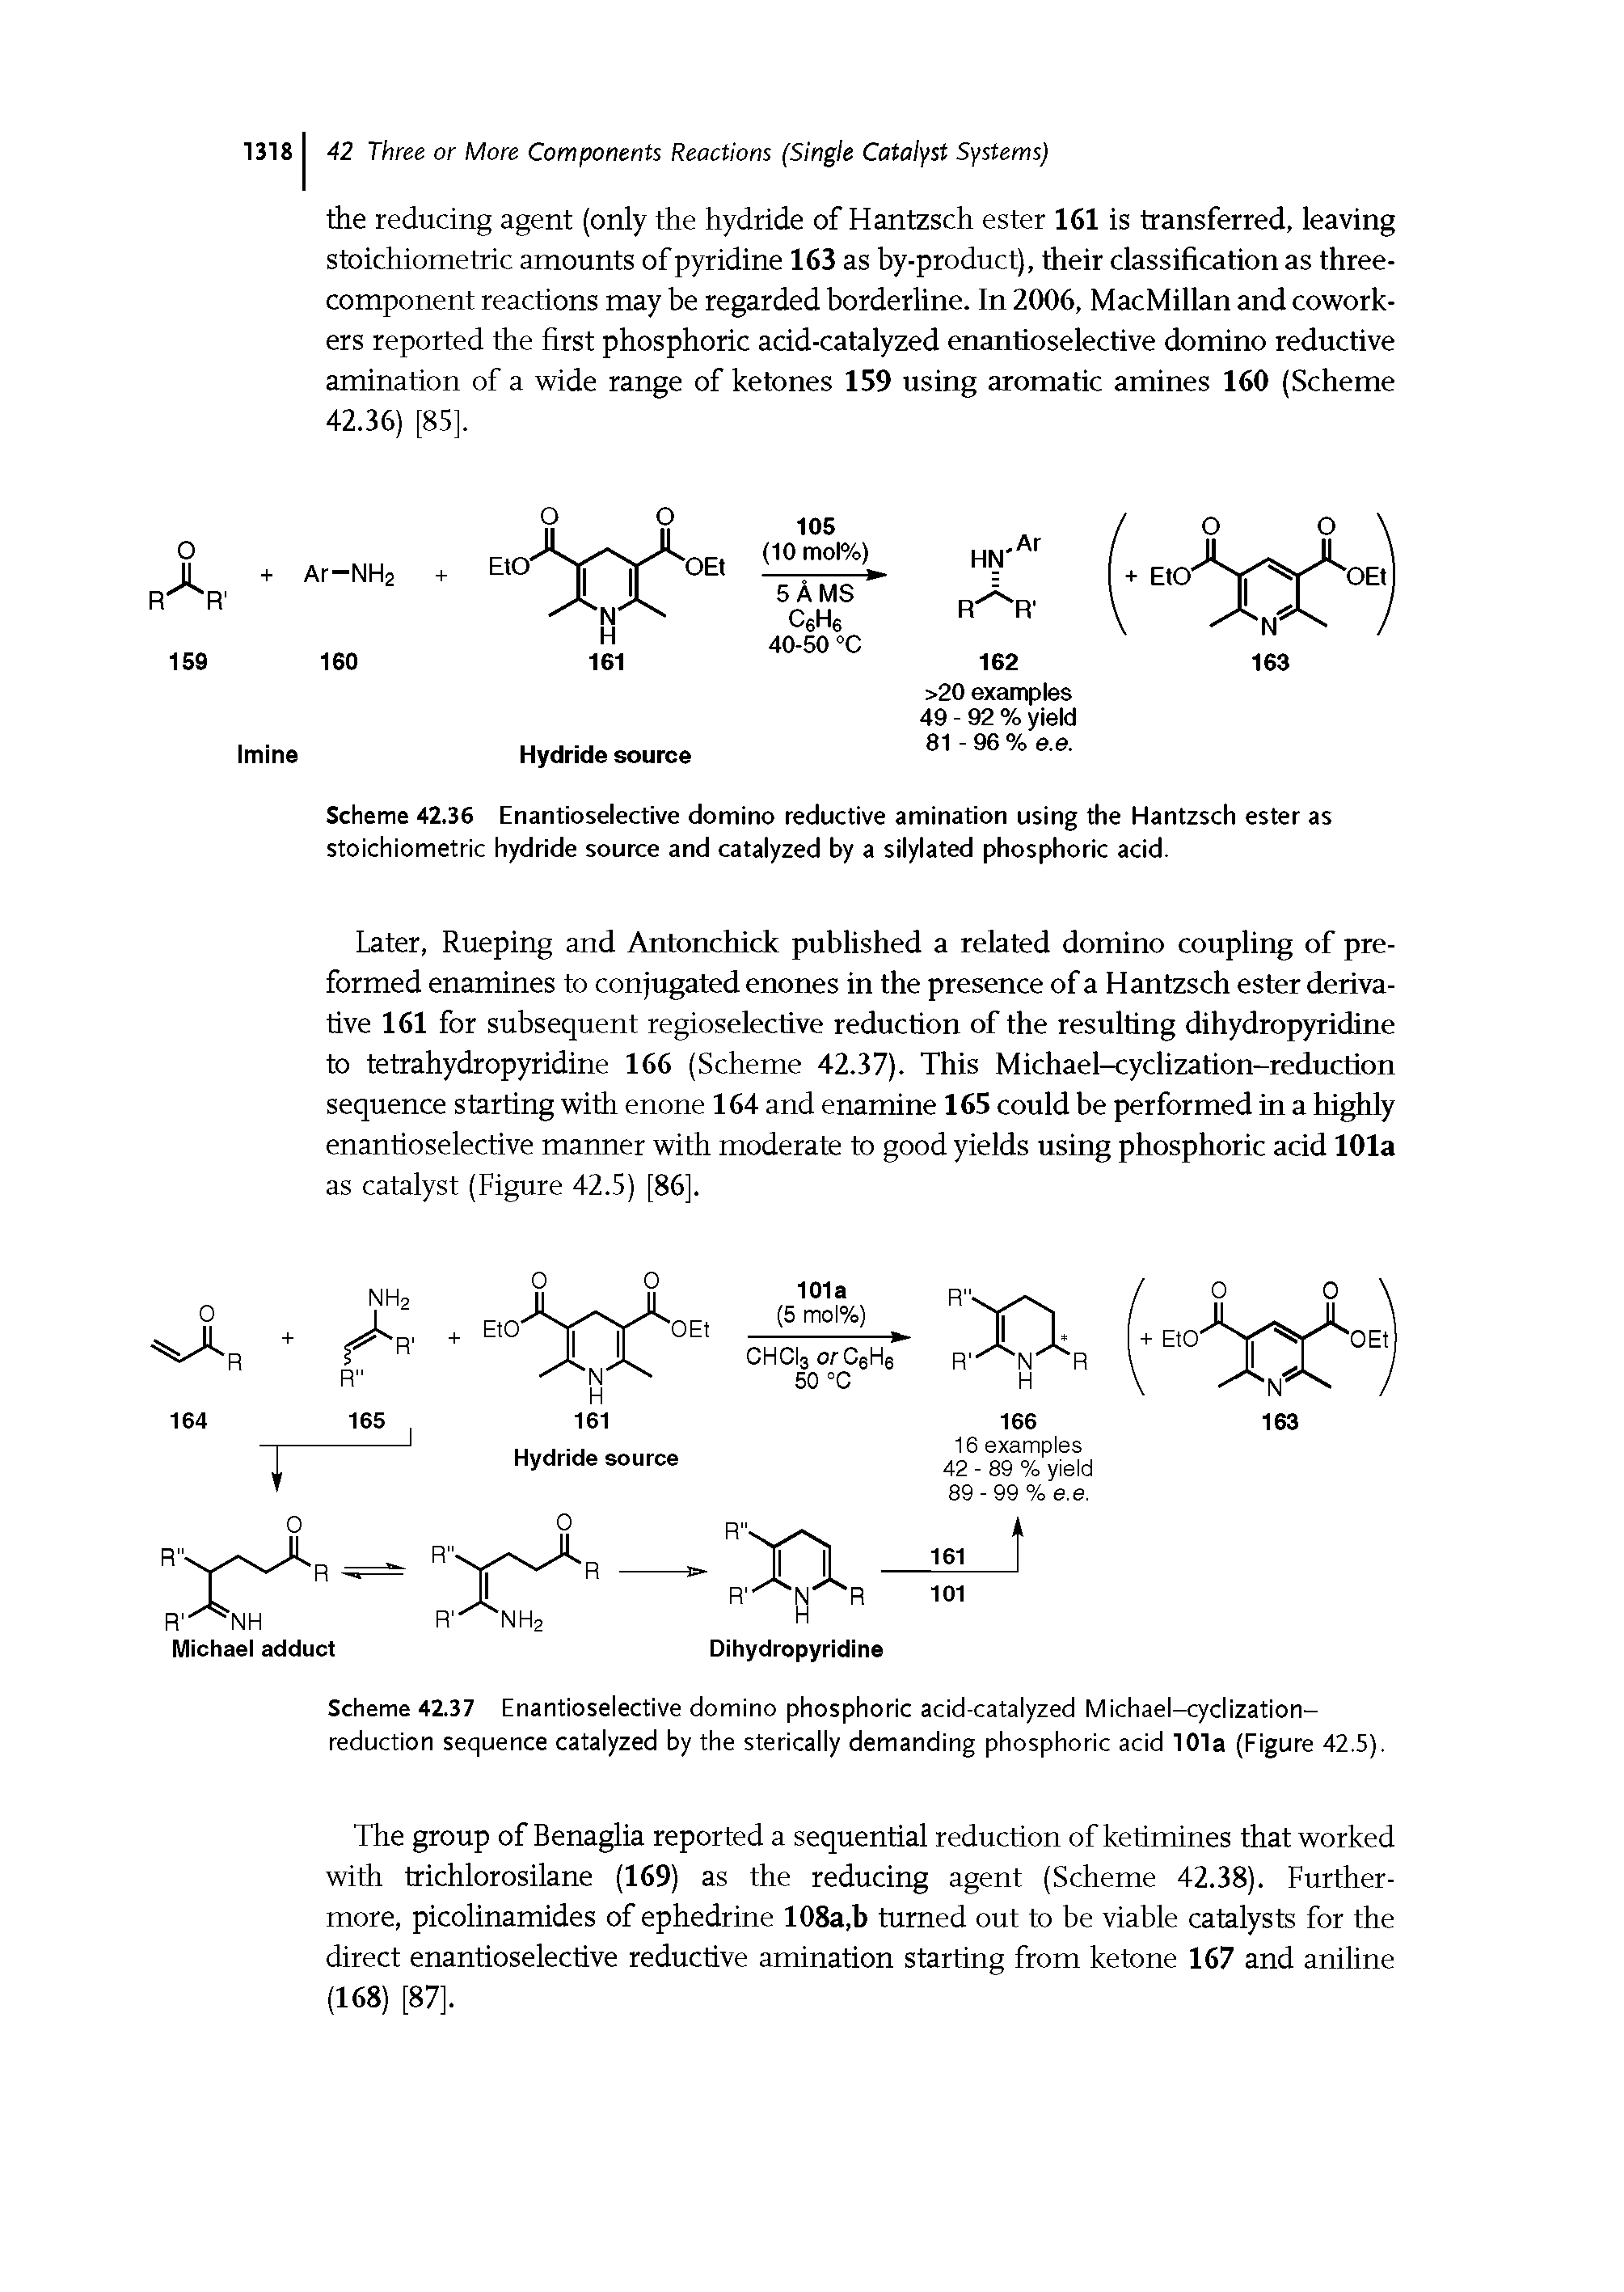 Scheme 42.37 Enantioselective domino phosphoric acid-catalyzed Michael-cyclization-reduction sequence catalyzed by the sterically demanding phosphoric acid 101a (Figure 42.5).